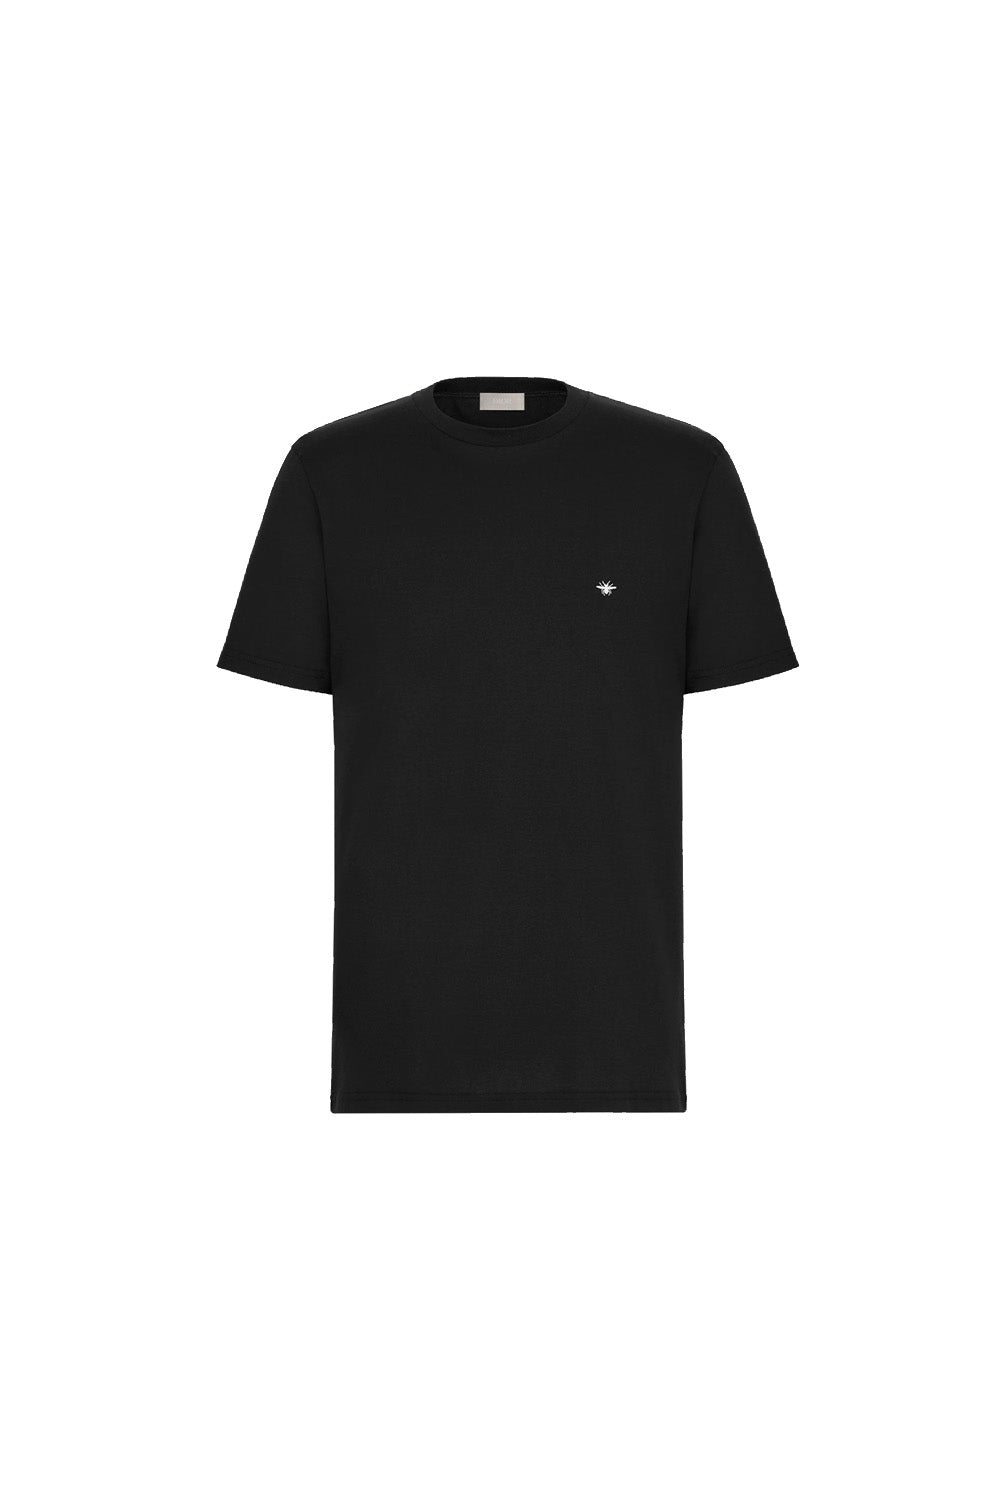 DIOR T-SHIRT WITH BEE EMBROIDERY BLACK